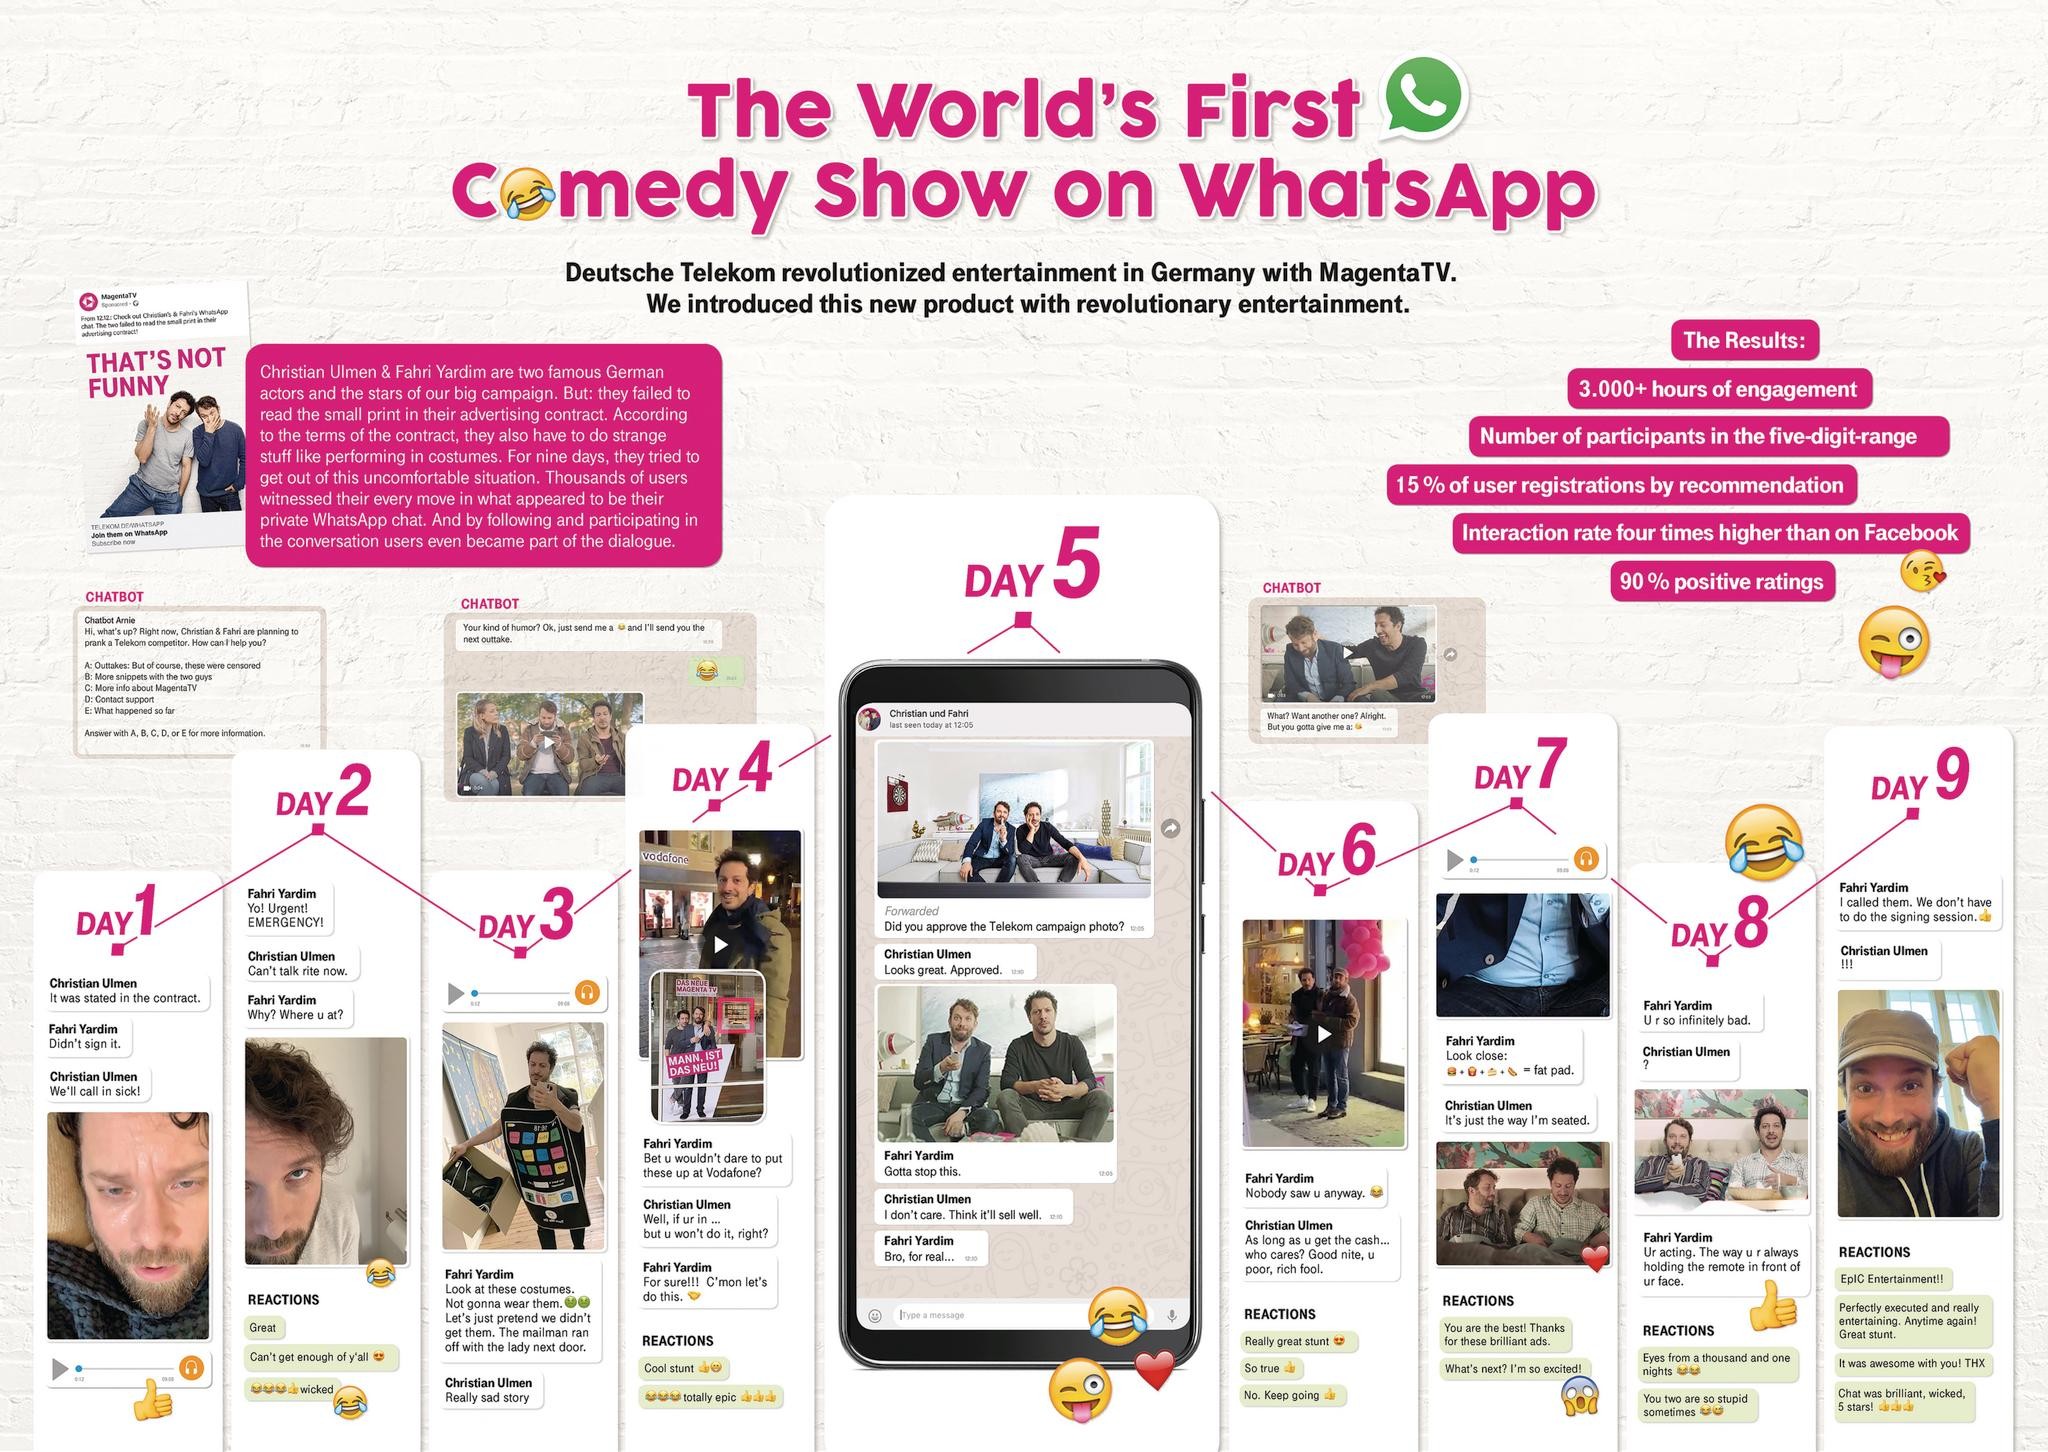 The World's First Comedy Show on WhatsApp